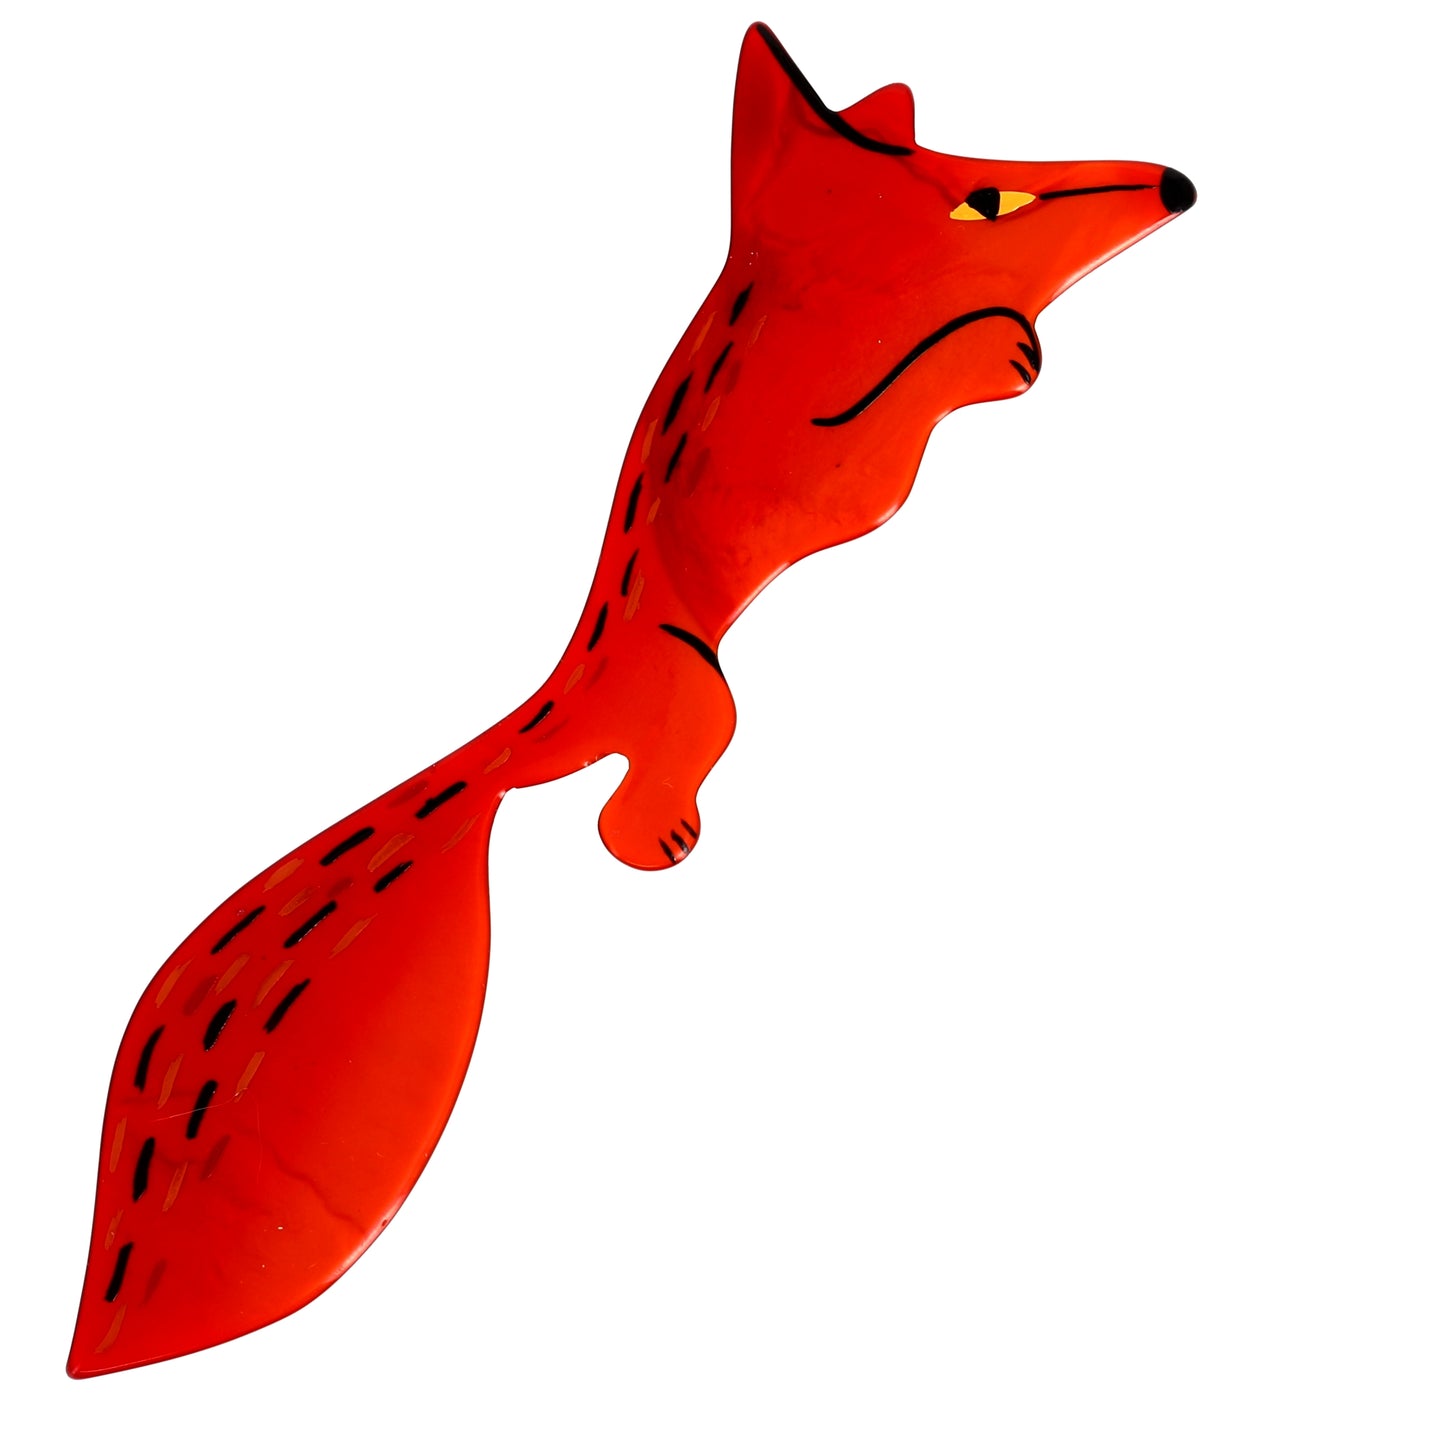 Ginger Long Fox Brooch in galalith